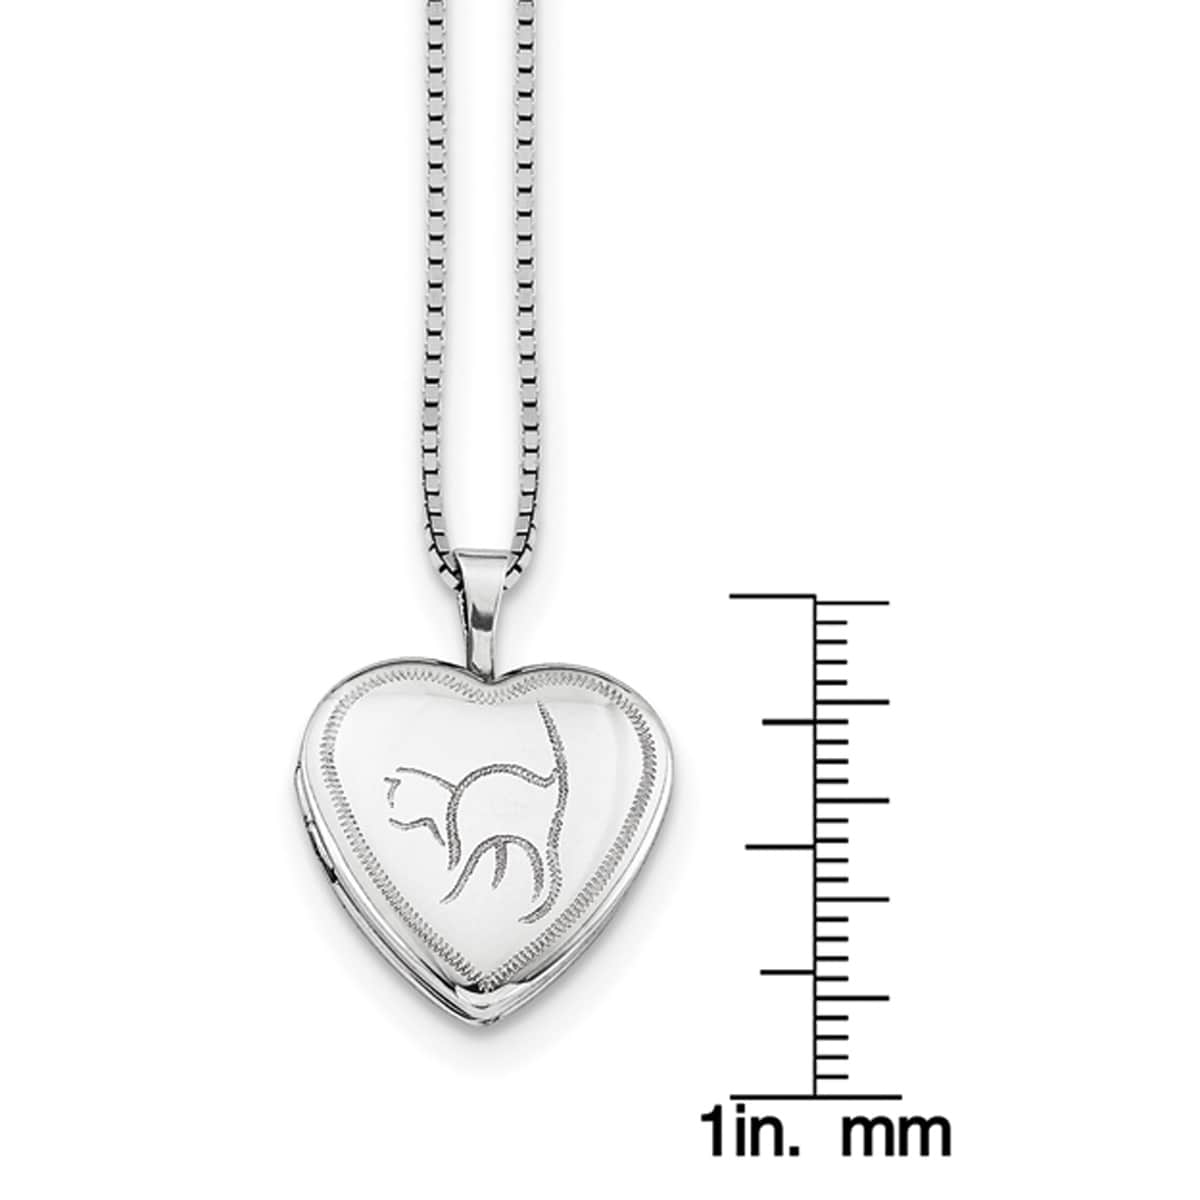 Sterling Silver Rhodium-Plated 16Mm Enameled Lily Heart Locket New